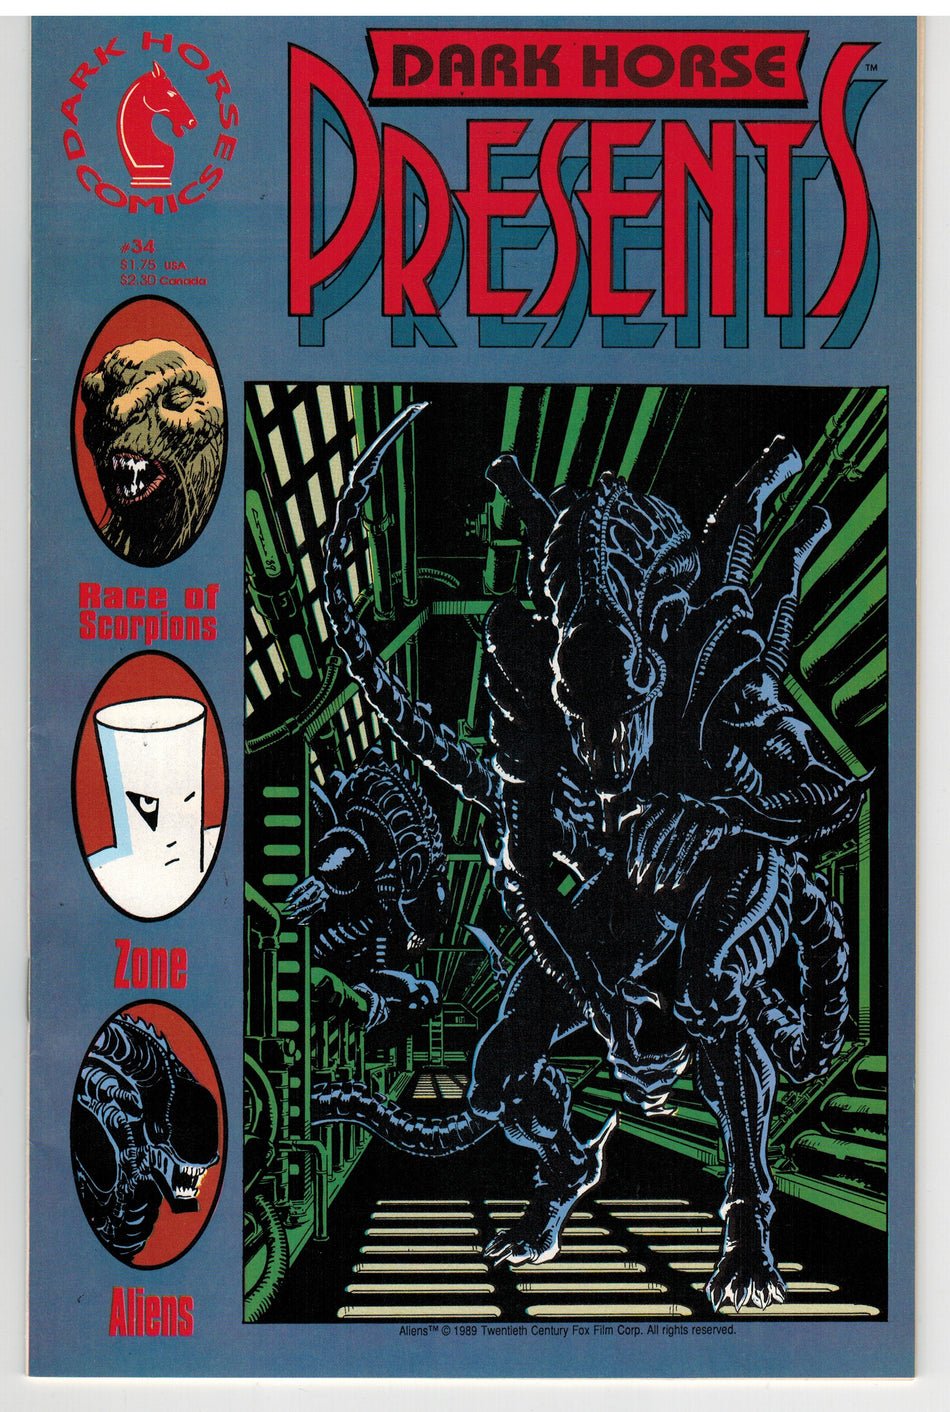 Photo of Dark Horse Presents, Vol. 1 (1989) Issue 34 - Fine Comic sold by Stronghold Collectibles